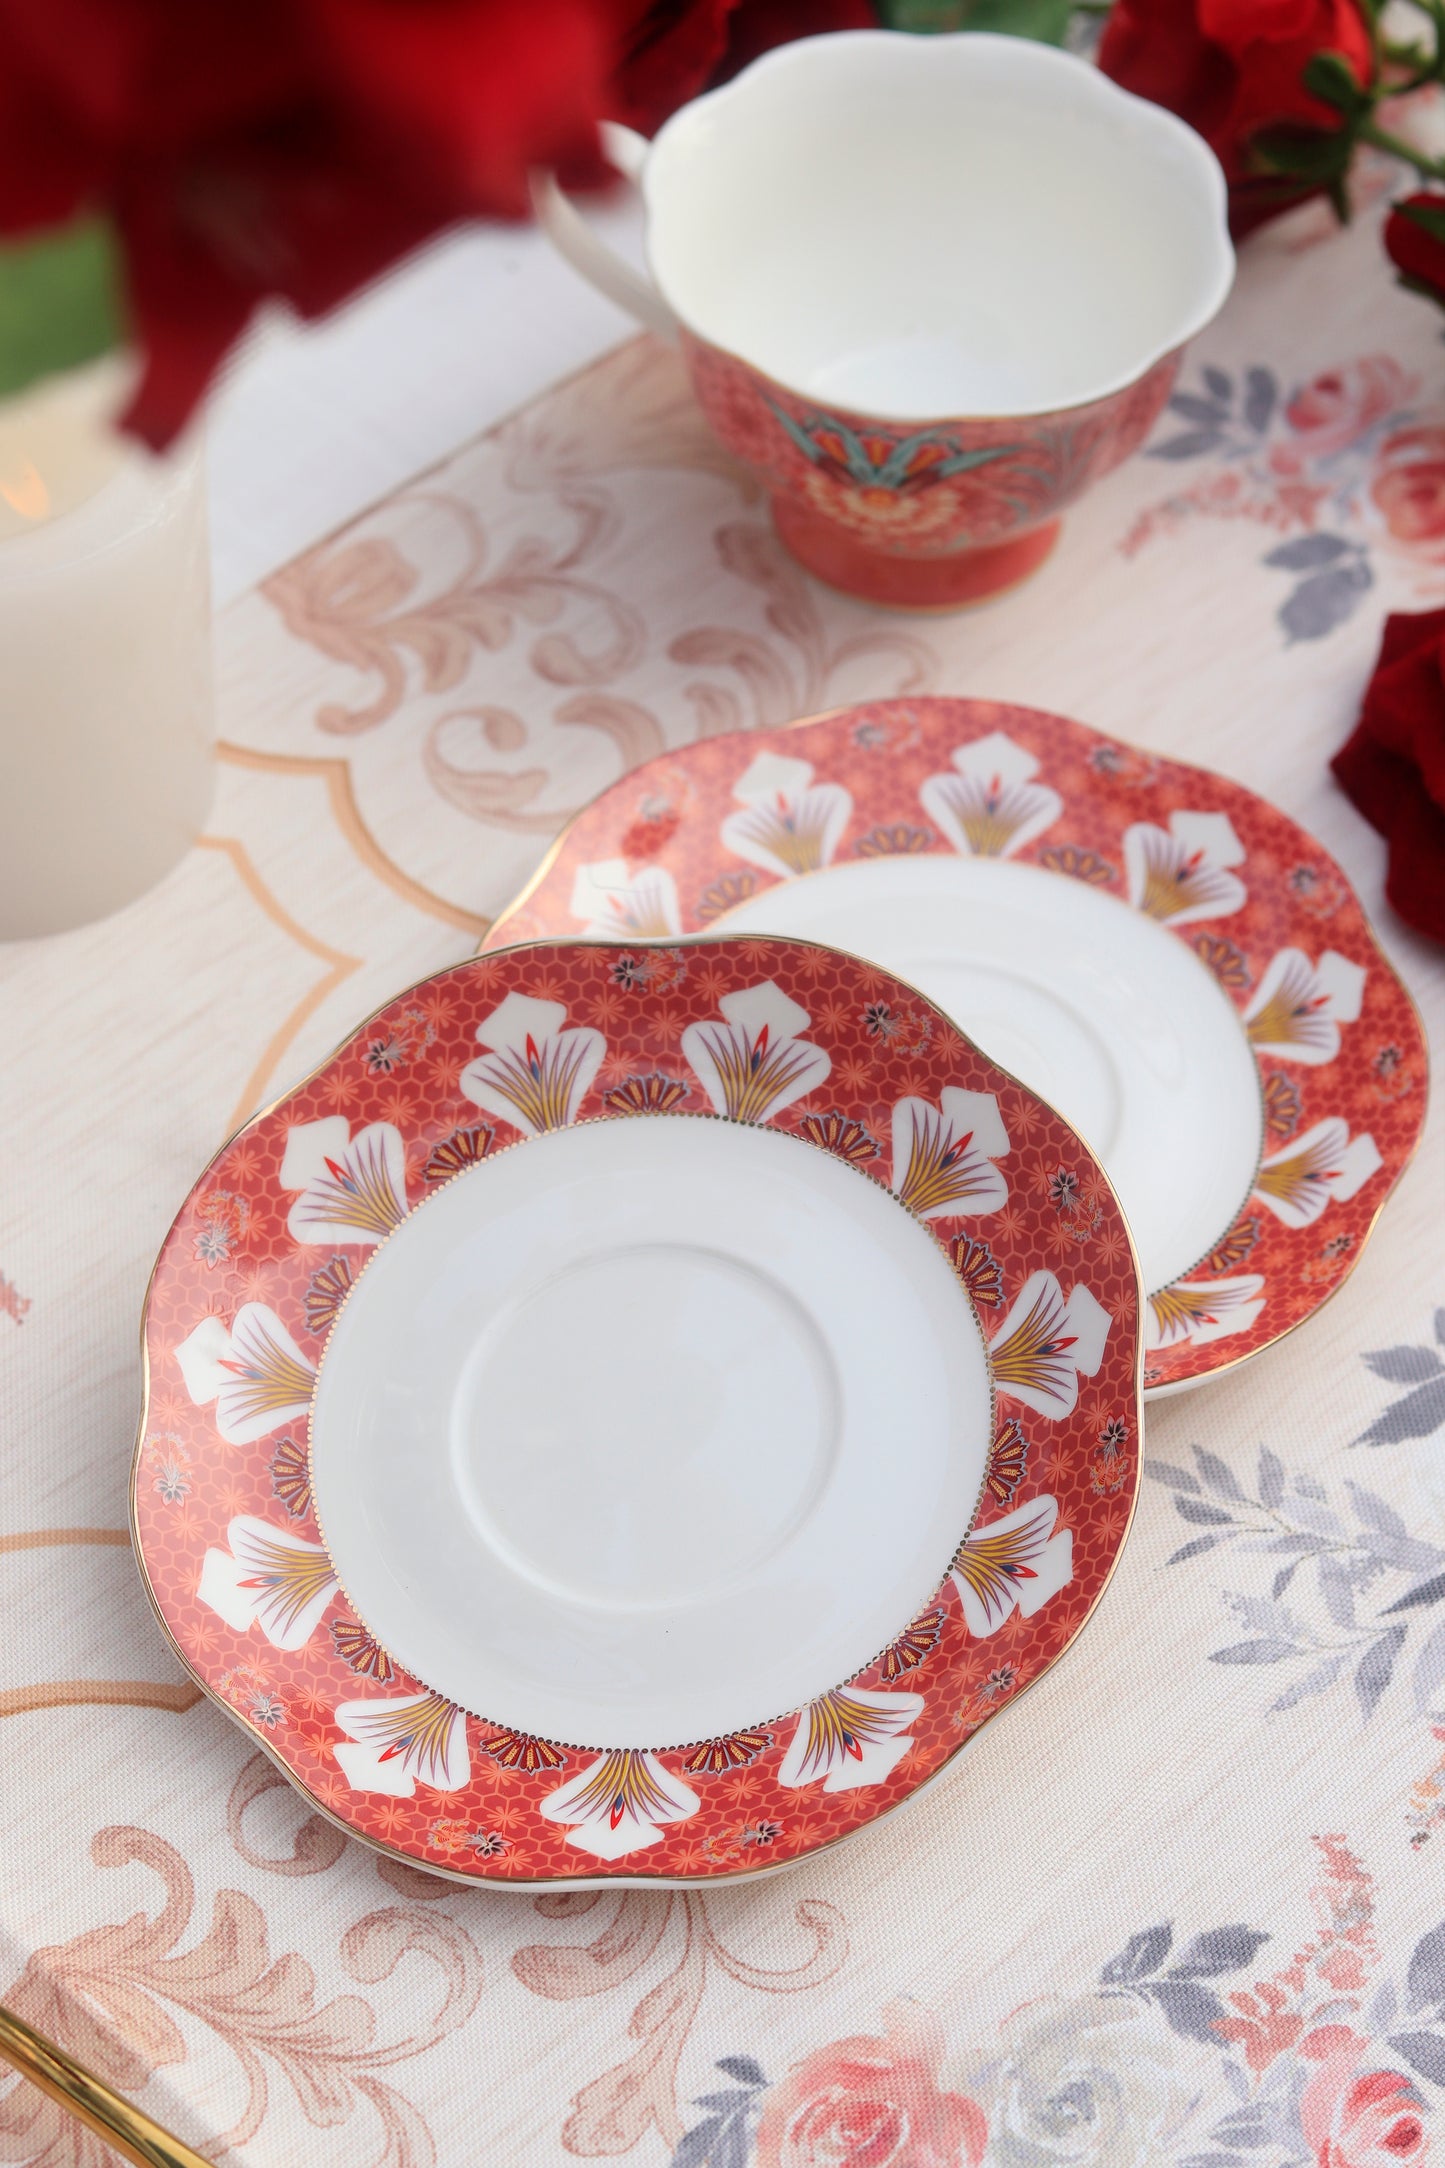 Scarlet Blume Cup and Saucer Set (Vintage Collection, 6 Cups and 6 Saucers)